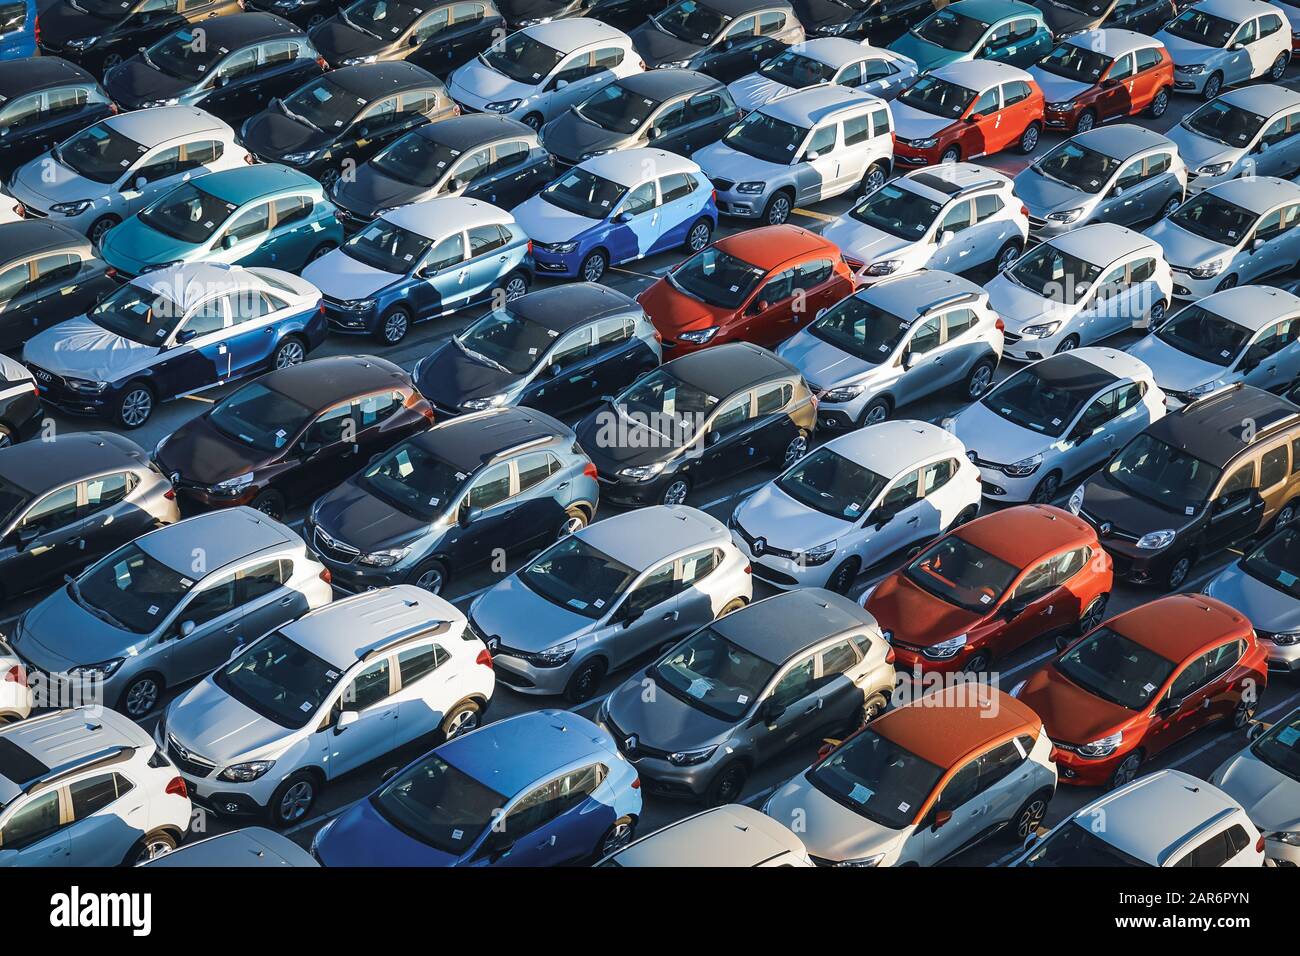 Rows of new cars waiting to be sold. Stock Photo